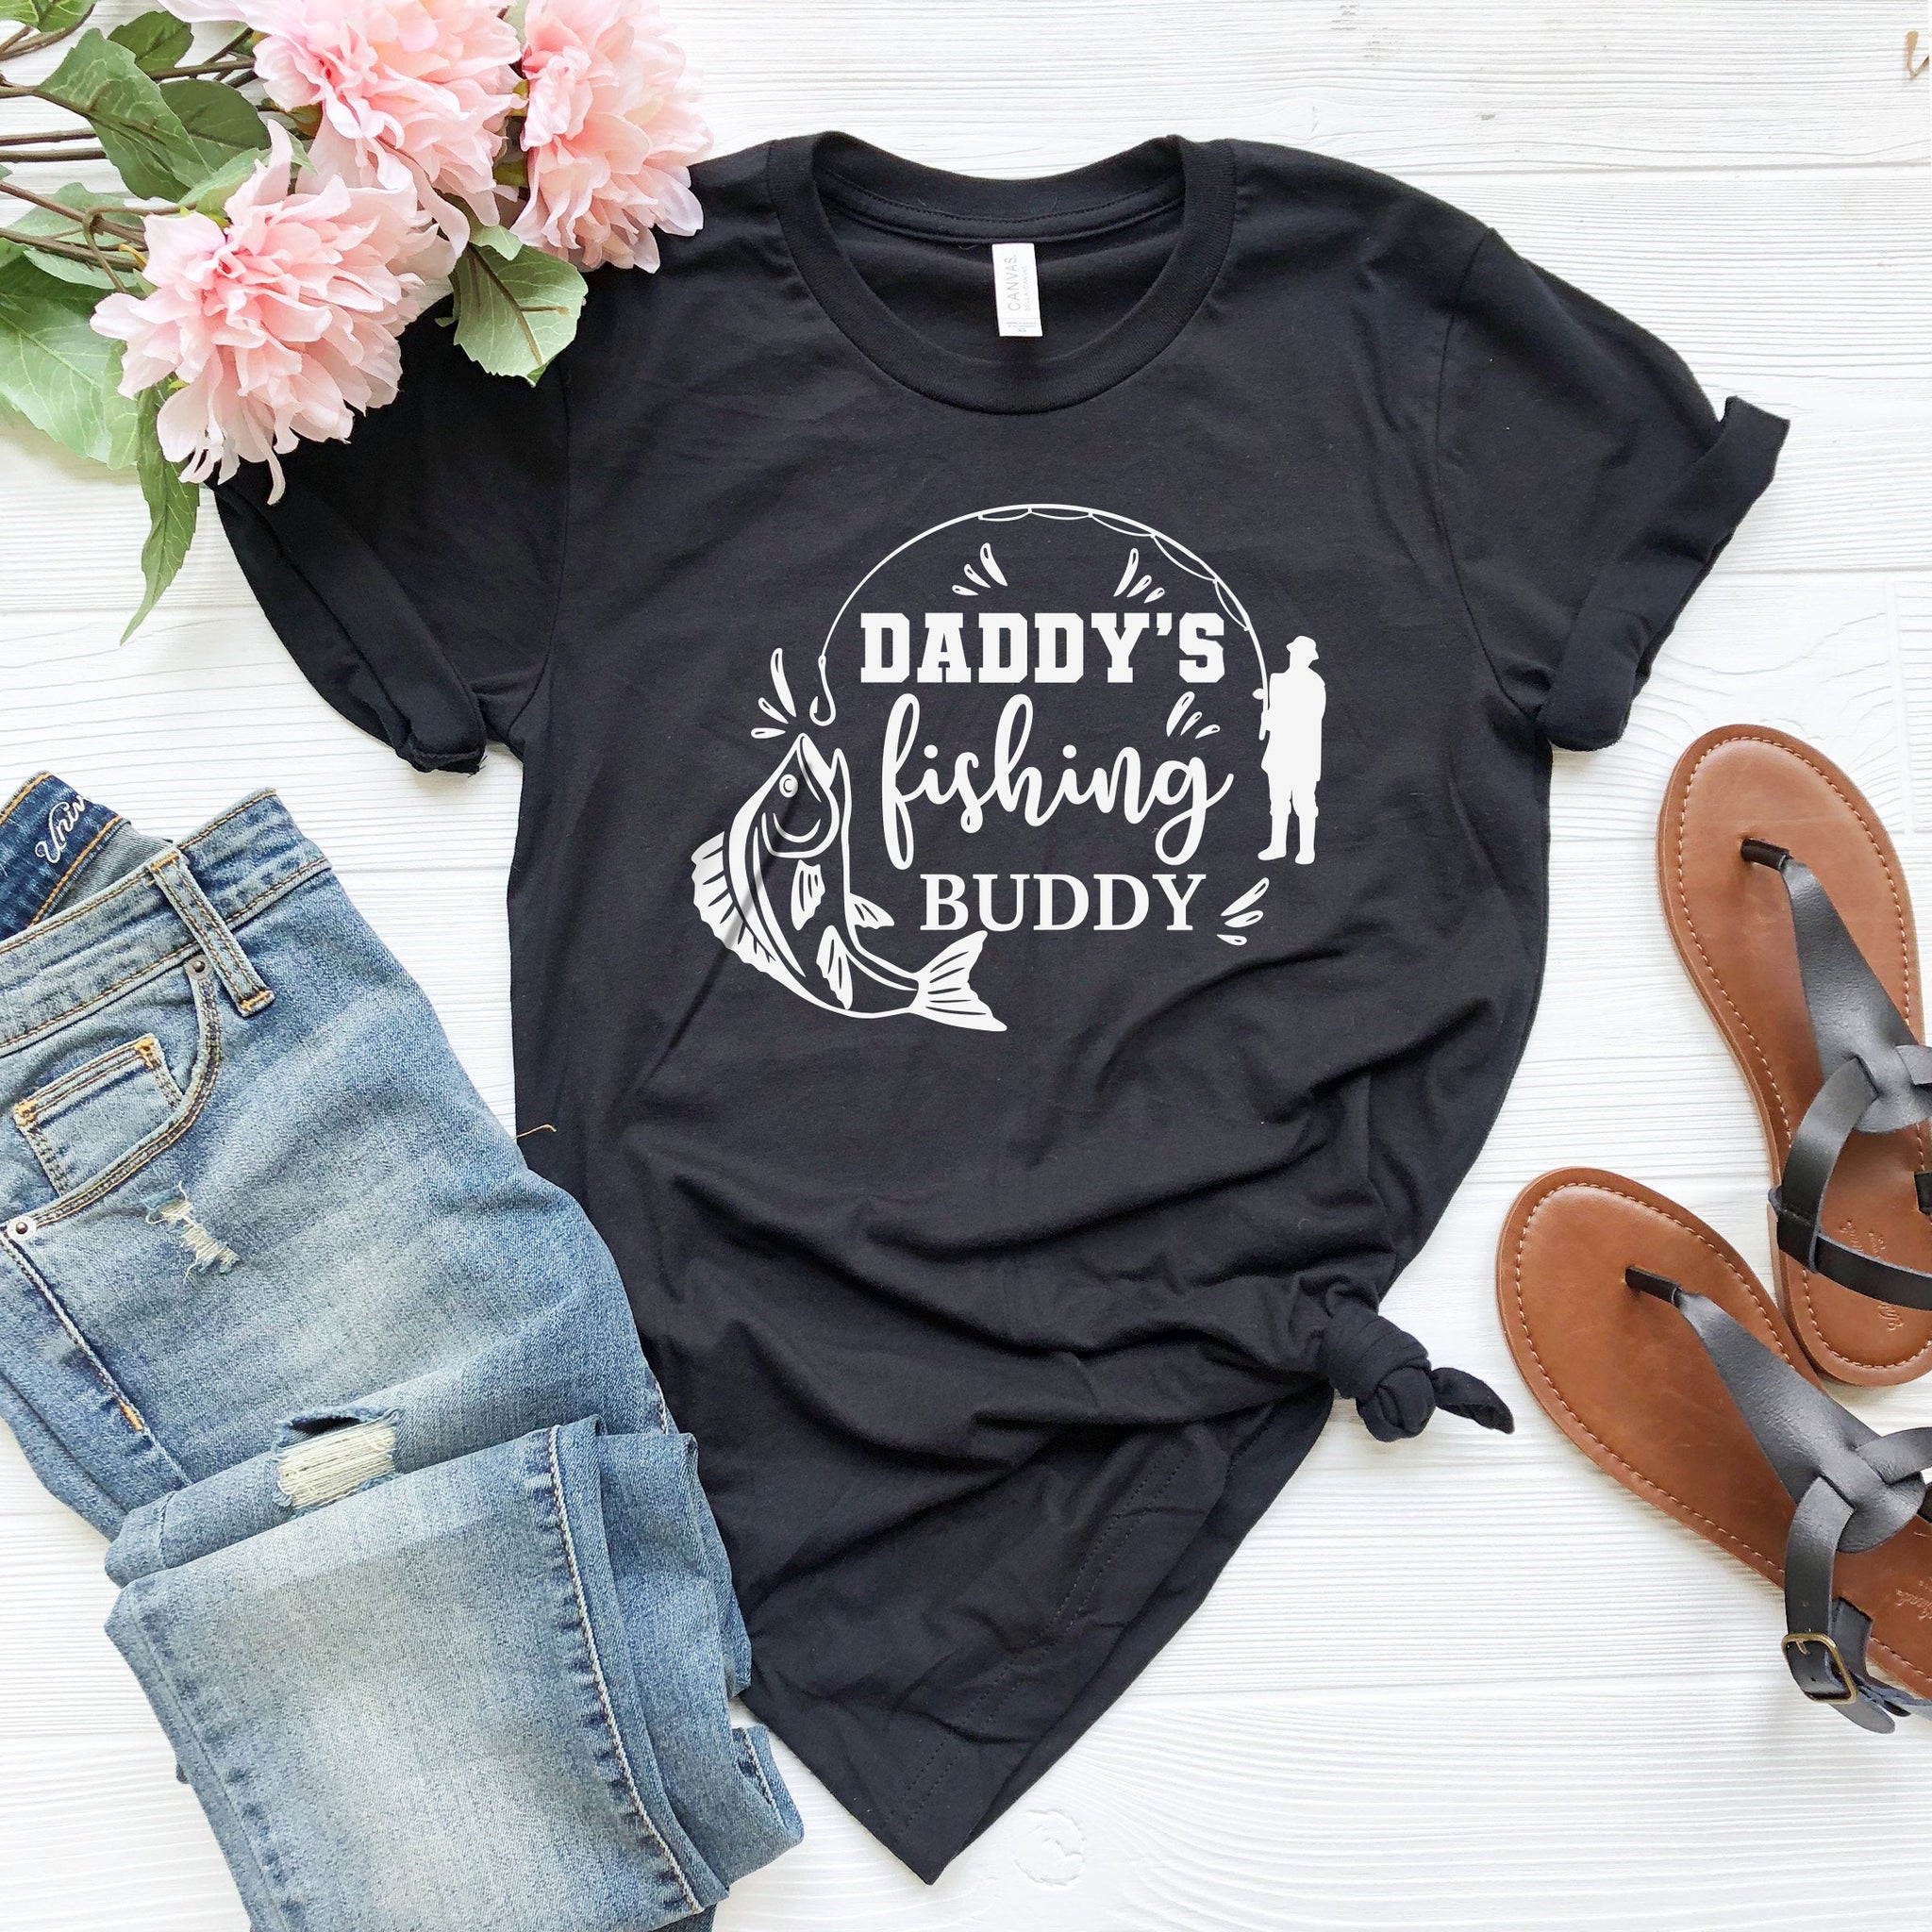 Funny Dad Tshirts for Fathers Day, Dad gift shirts, Dad shirts from daughter, Funny Shirts for dad men husband,Dad Birthday, - Fastdeliverytees.com